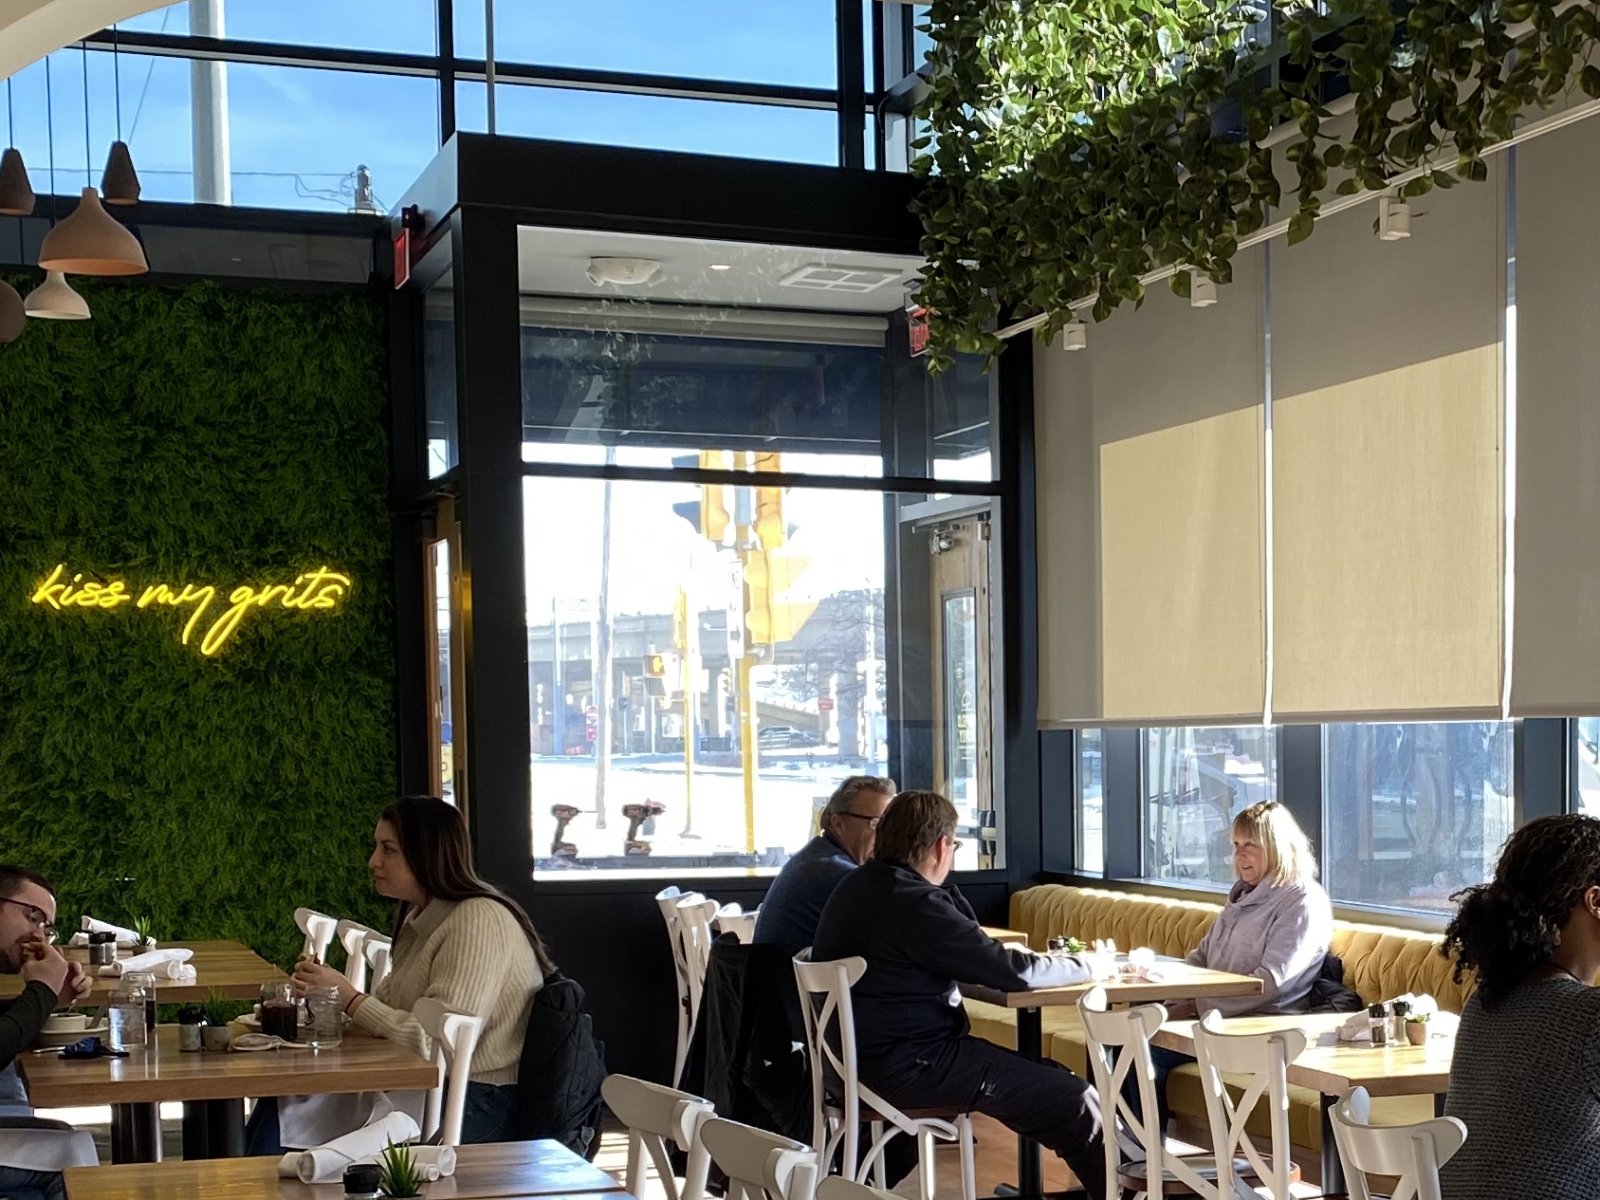 Dining: Tupelo Honey Cafe Is Scrumptiously Southern » Urban Milwaukee